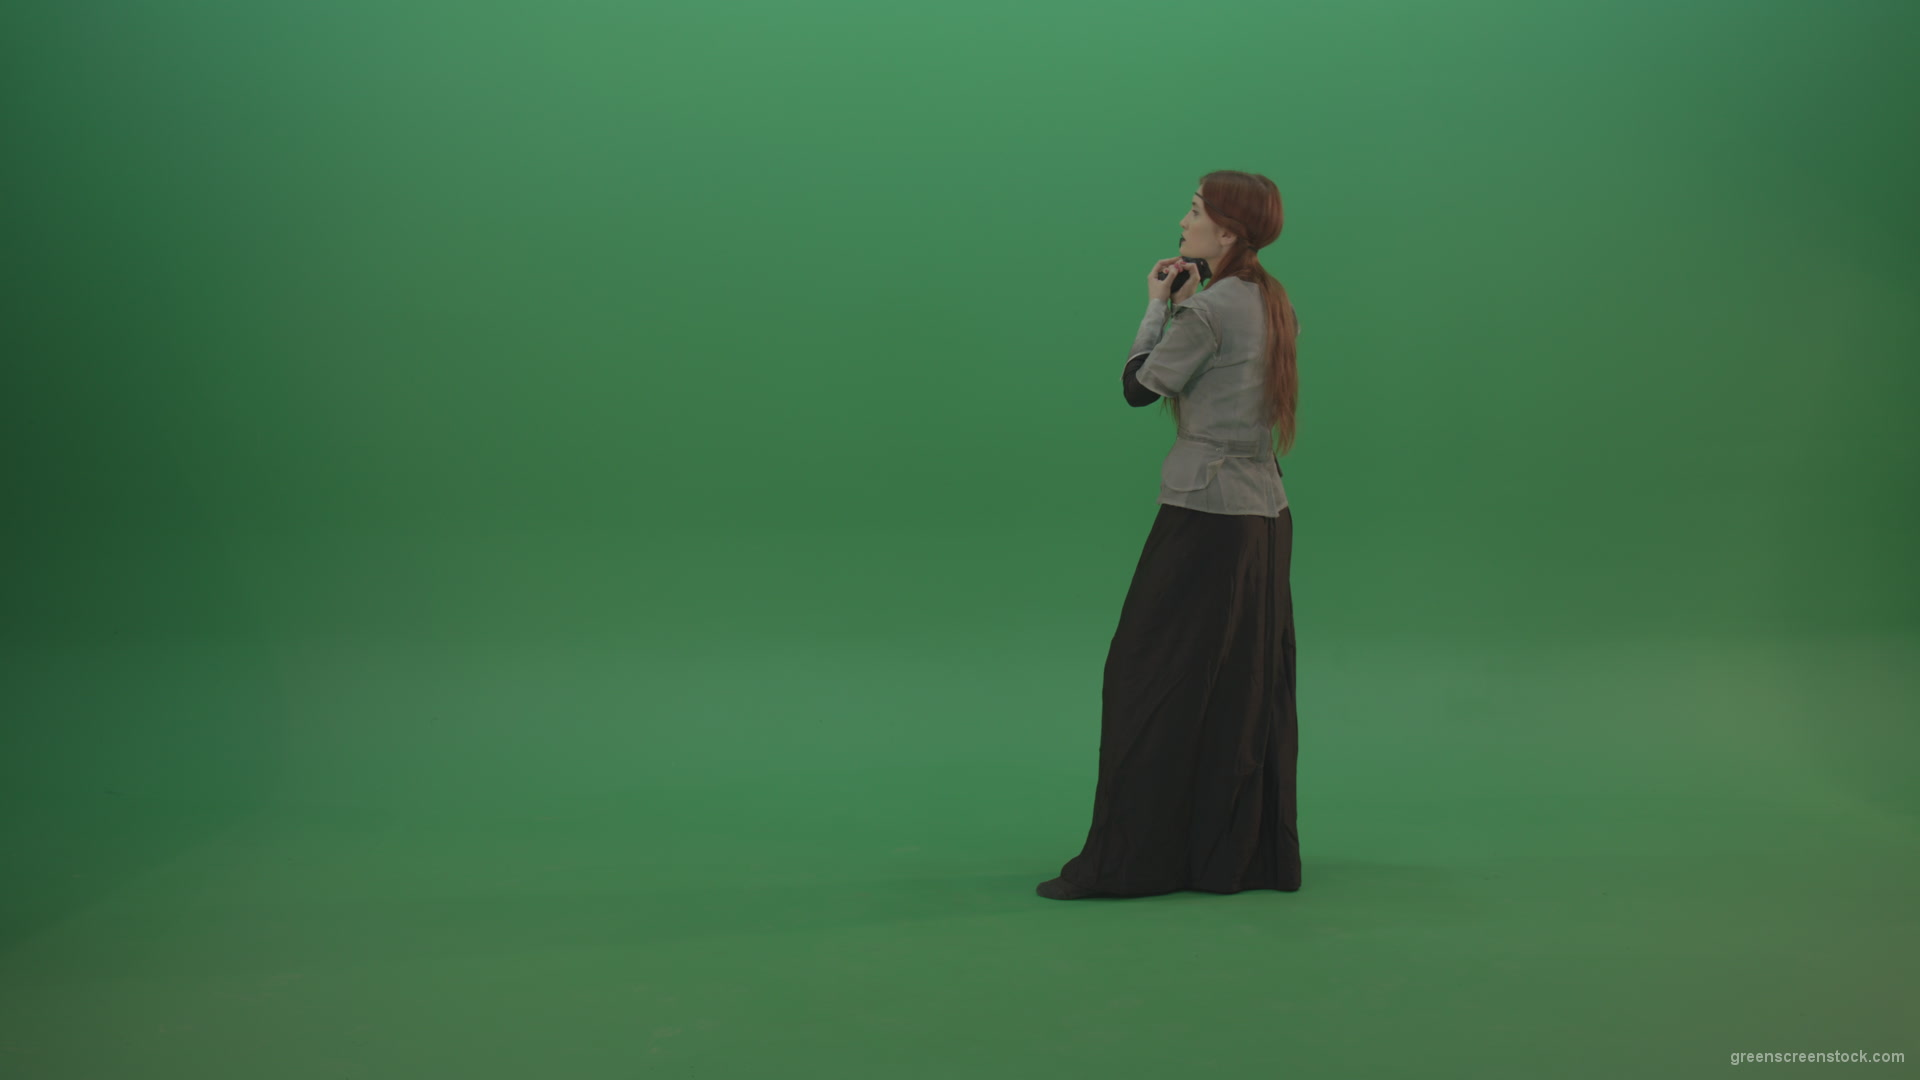 Girl-dressed-in-an-ancient-costume-holds-a-gun-in-her-hands-walks-and-shoots_007 Green Screen Stock